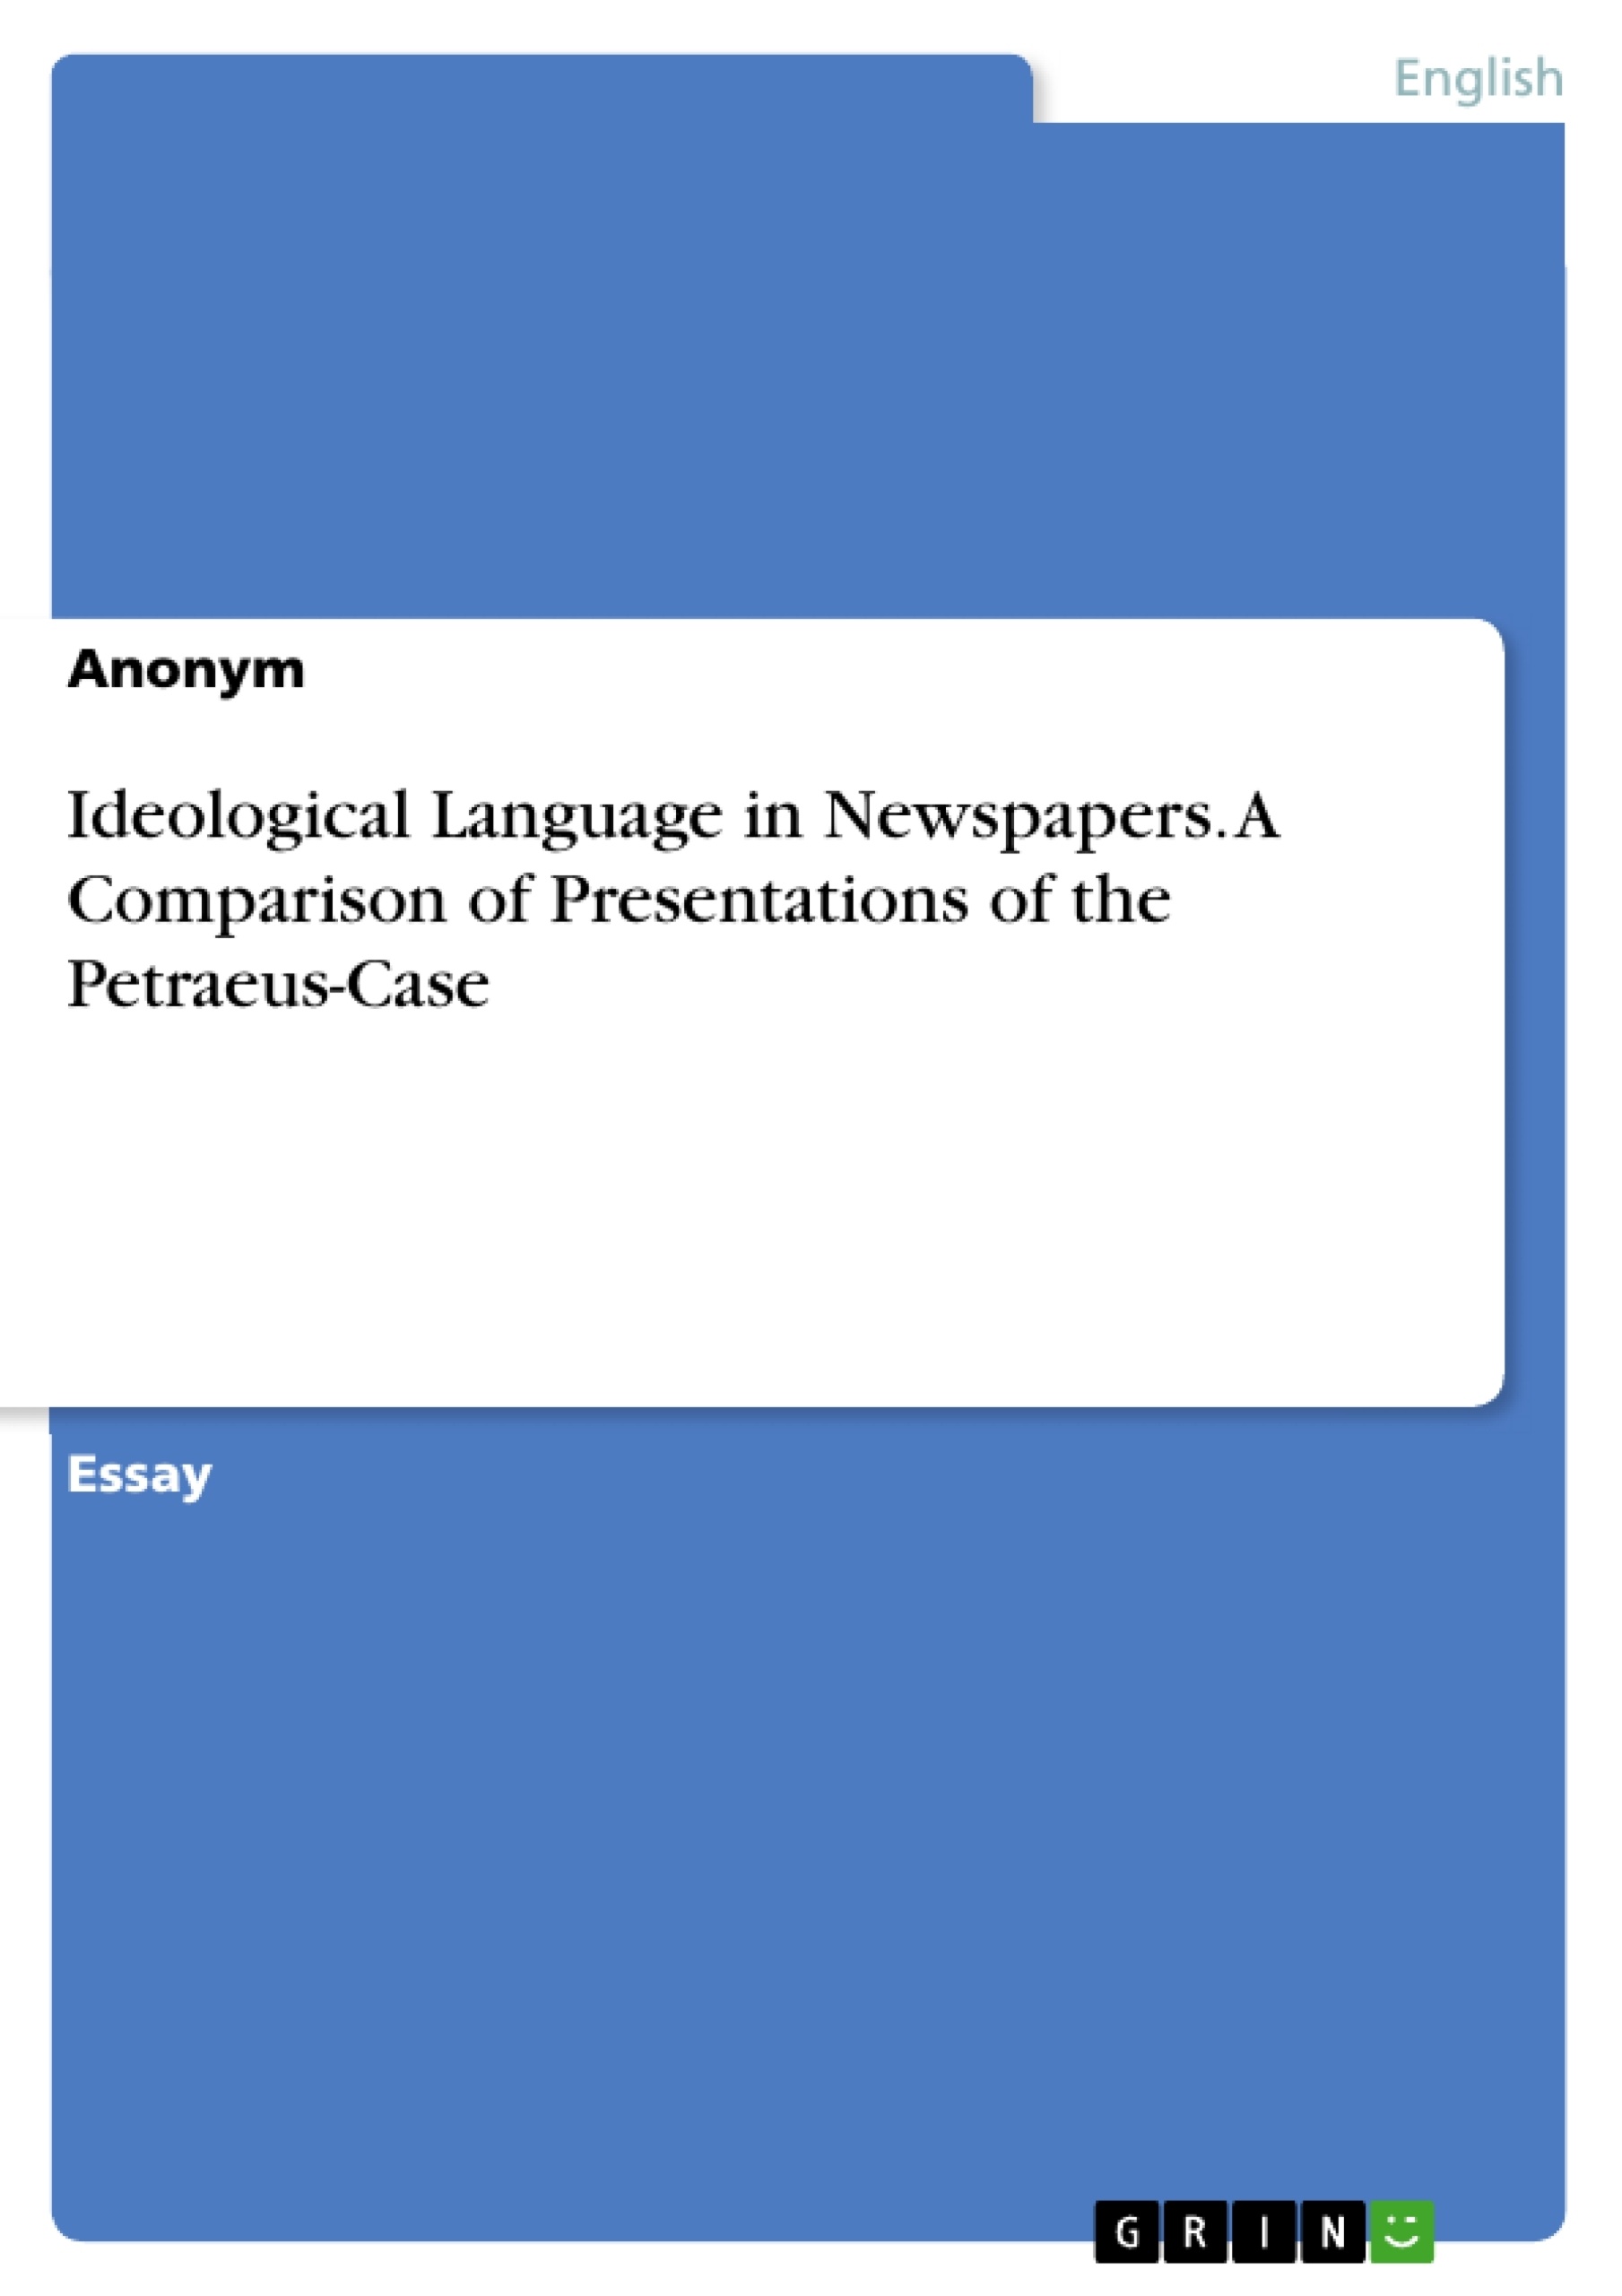 Title: Ideological Language in Newspapers. A Comparison of Presentations of the Petraeus-Case